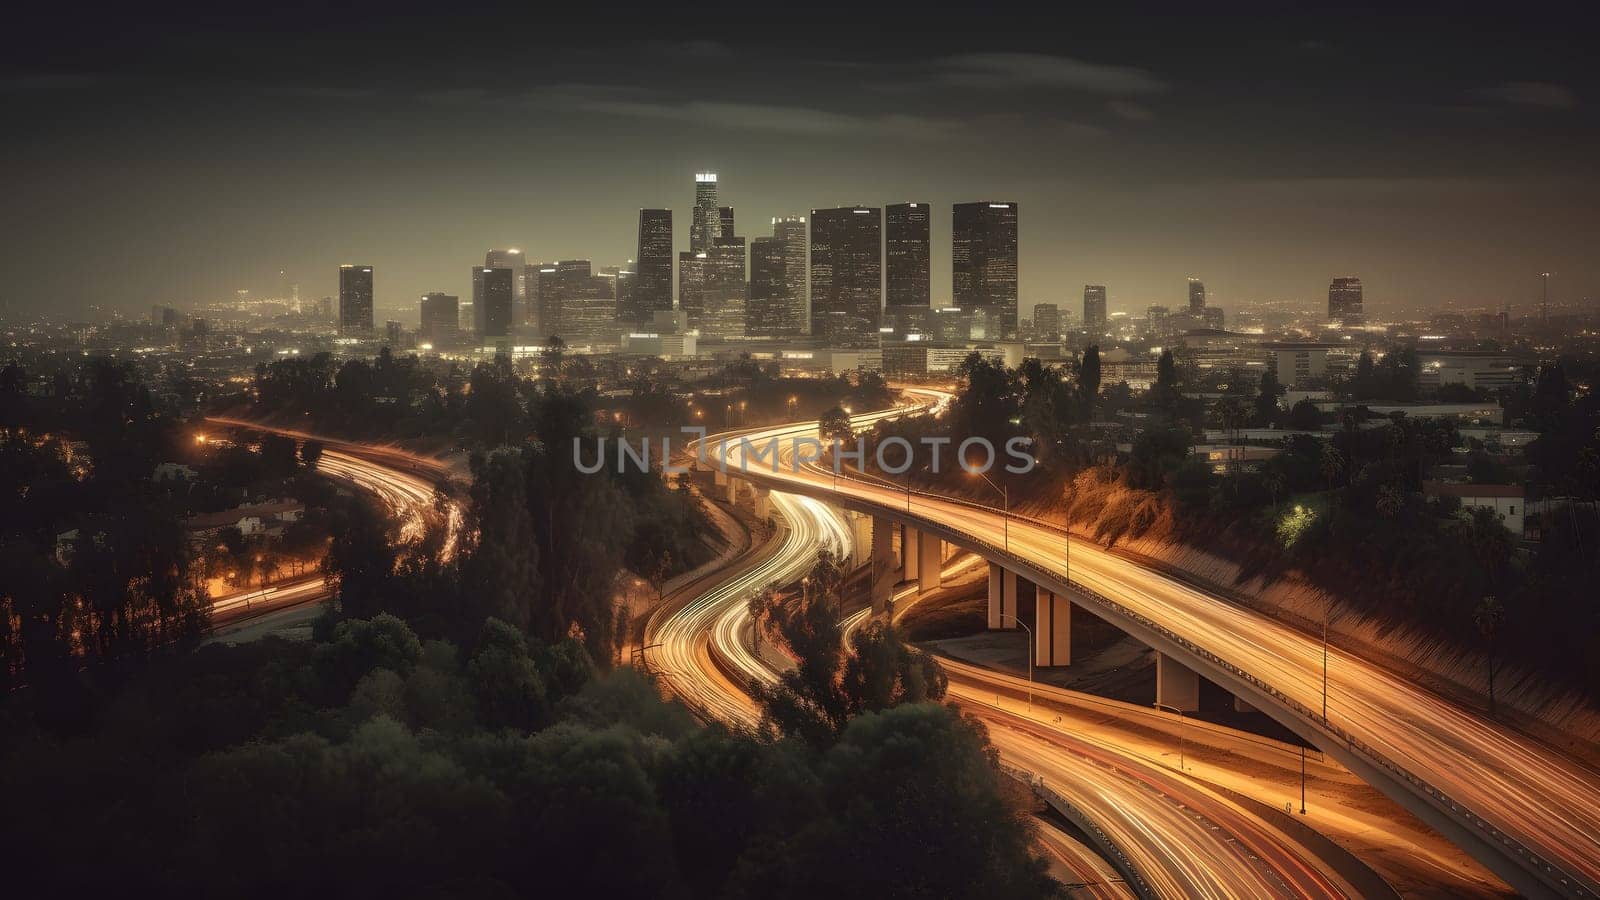 night cityscape skyline view of downtown Los Angeles style western city, neural network generated photorealistic image by z1b